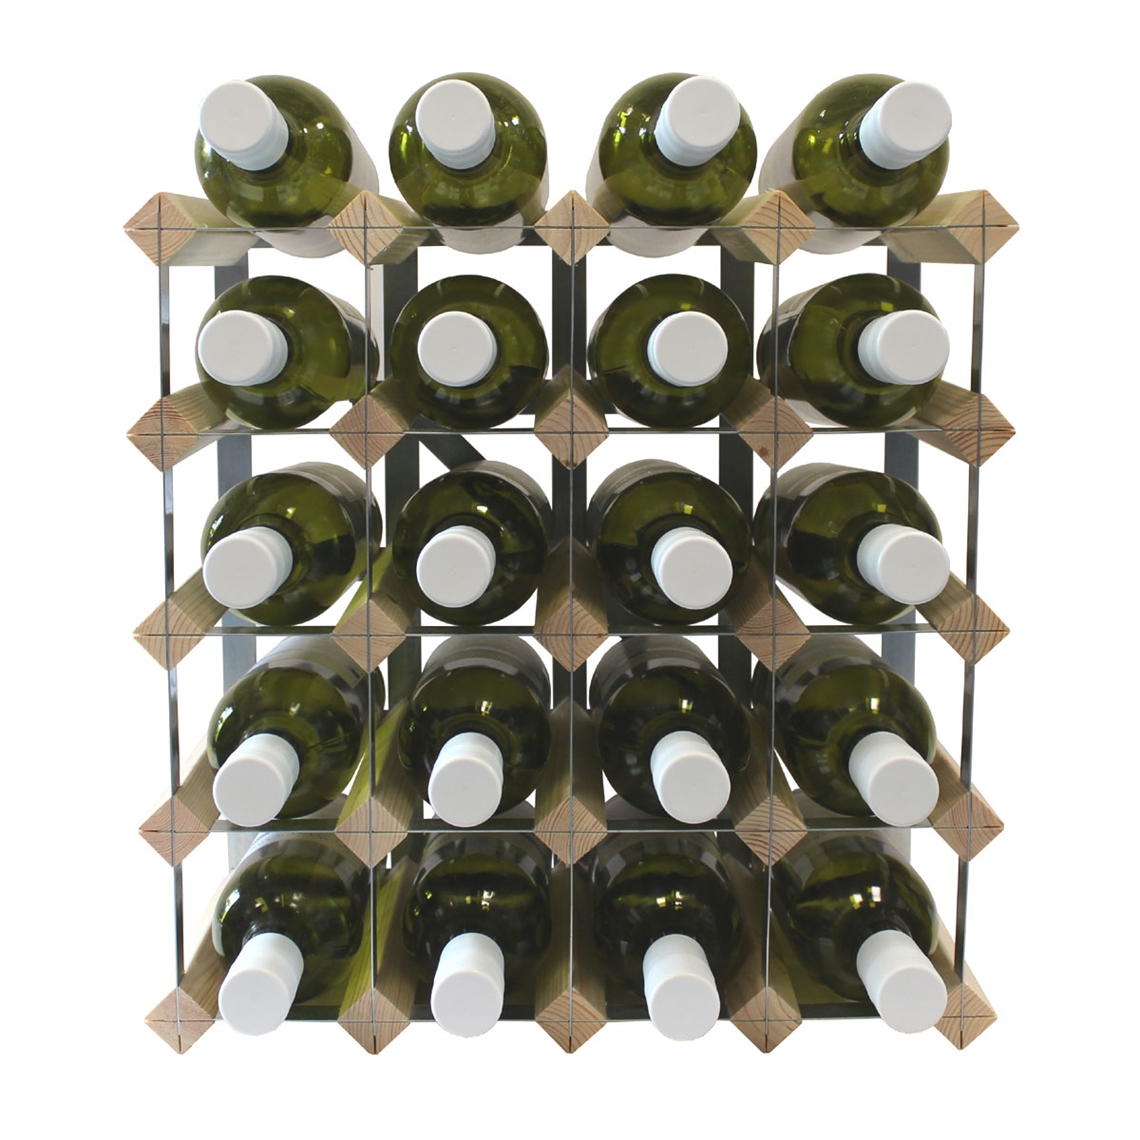 View more bespoke traditional wine racks faqs from our Assembled Wine Racks range